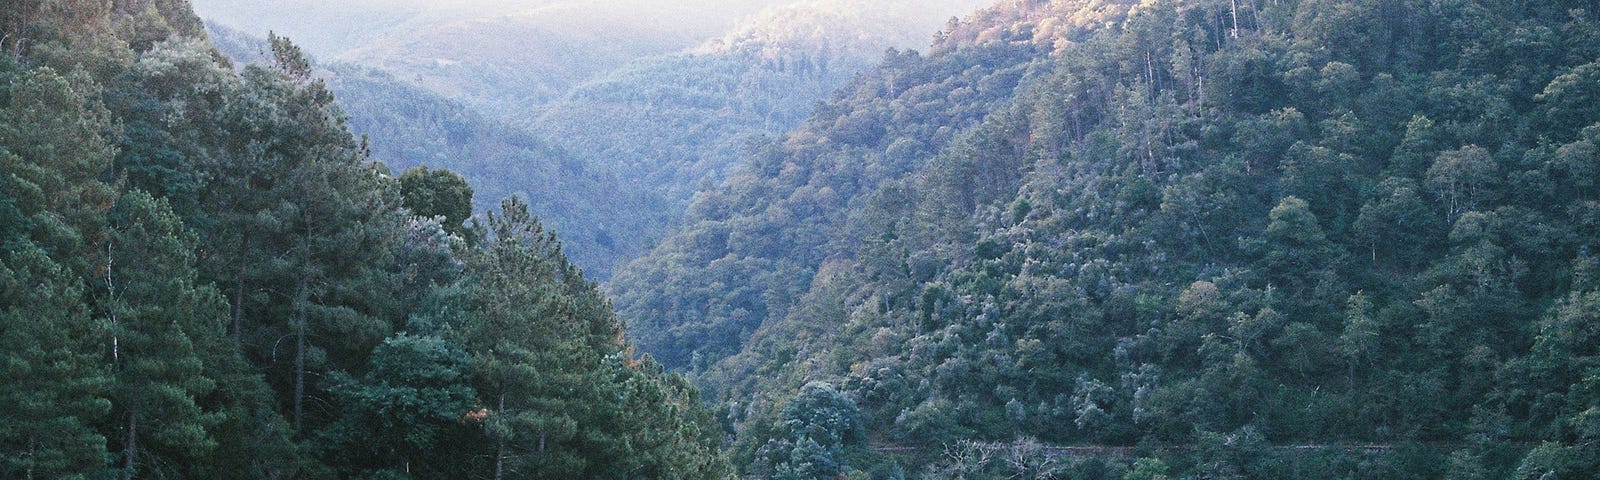 A forested valley